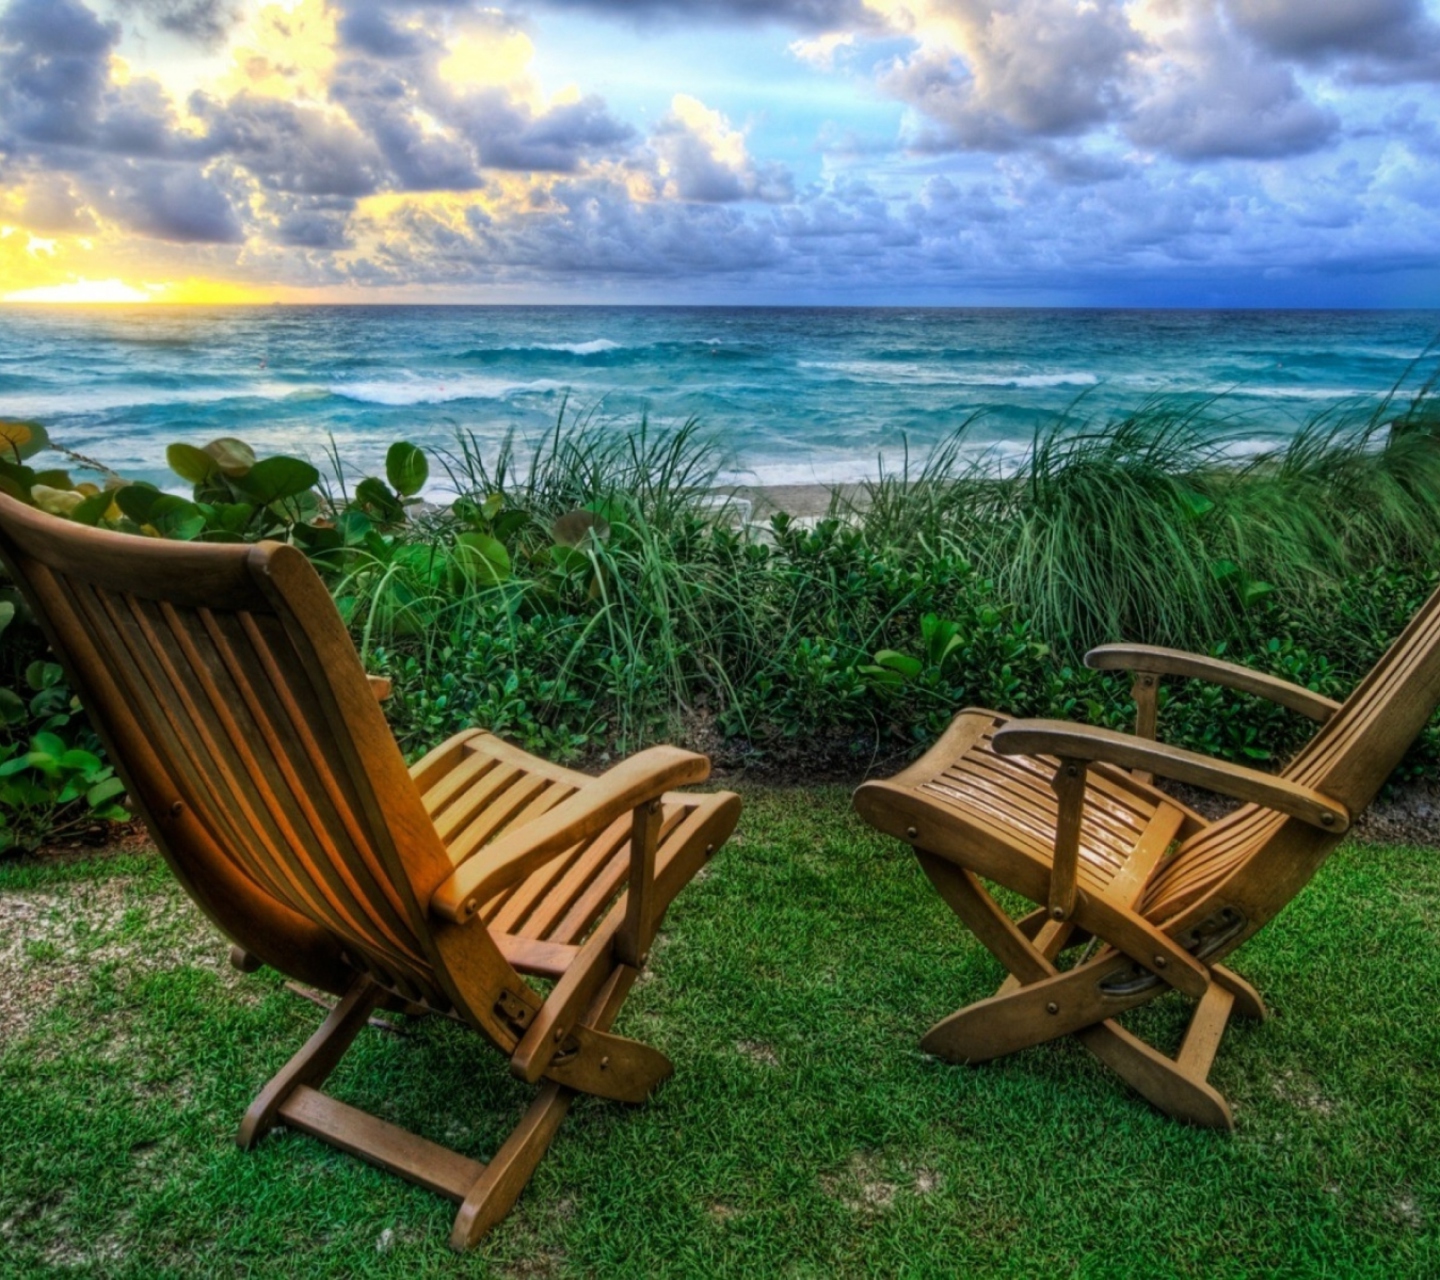 Chairs With Sea View wallpaper 1440x1280